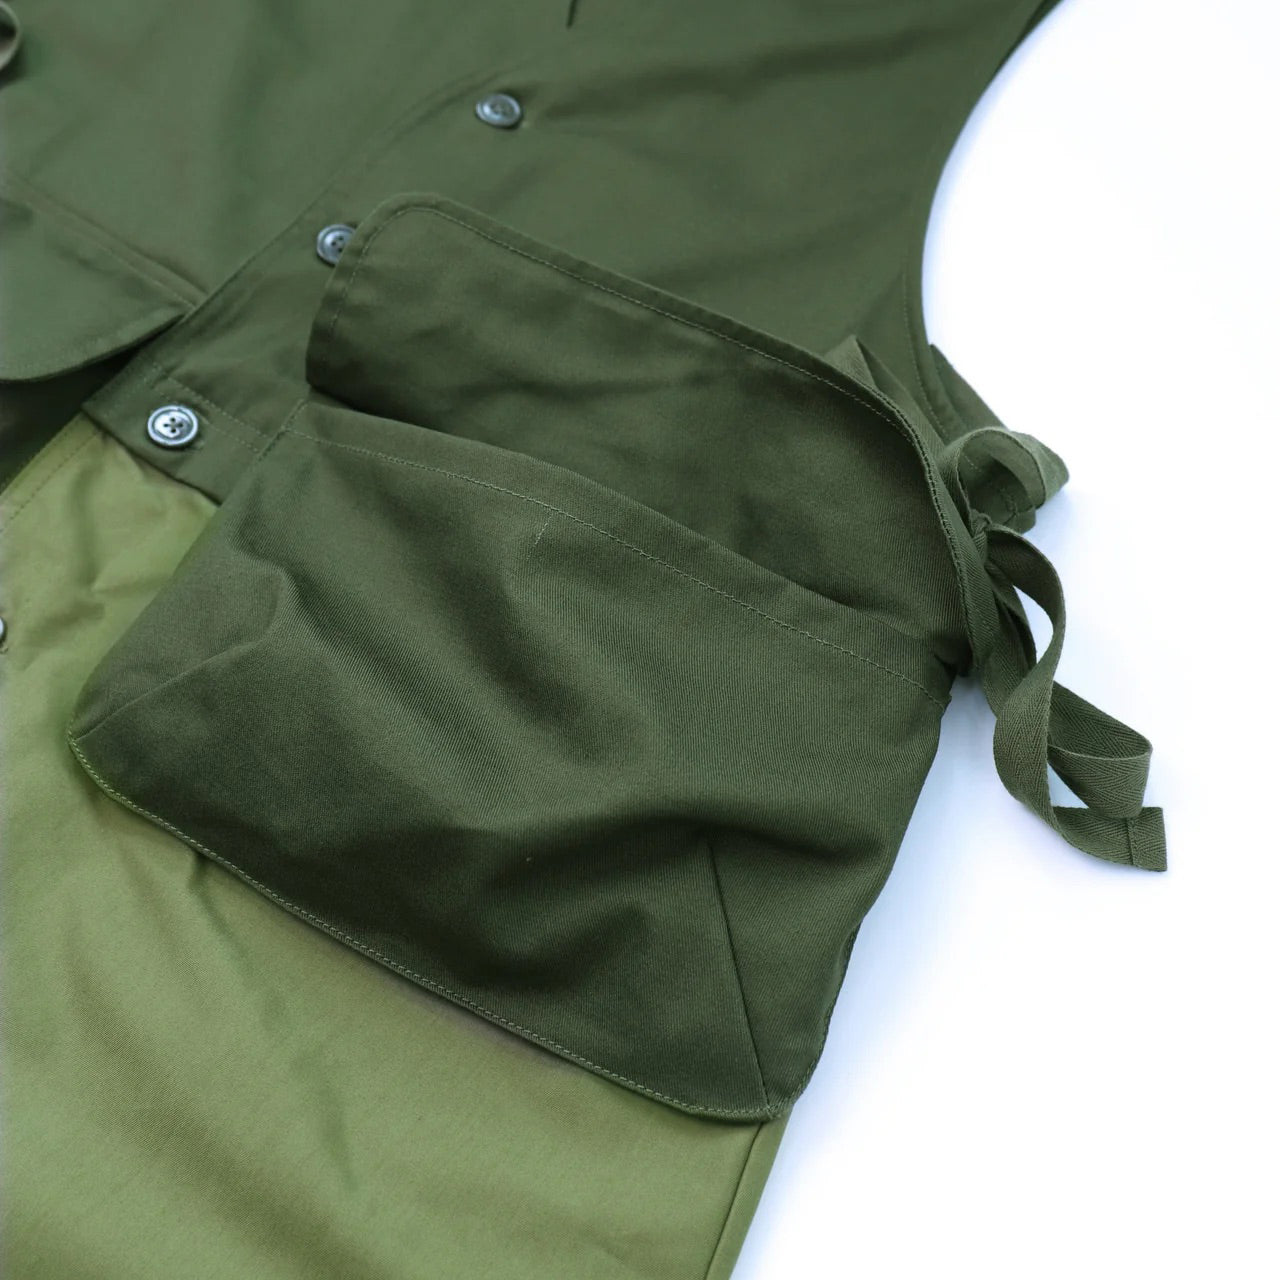 No:#616 | Name:FW23-MRS.WORKWARE FIELD ONE PIECE | Color:Green | Size:Free【WORKWARE】